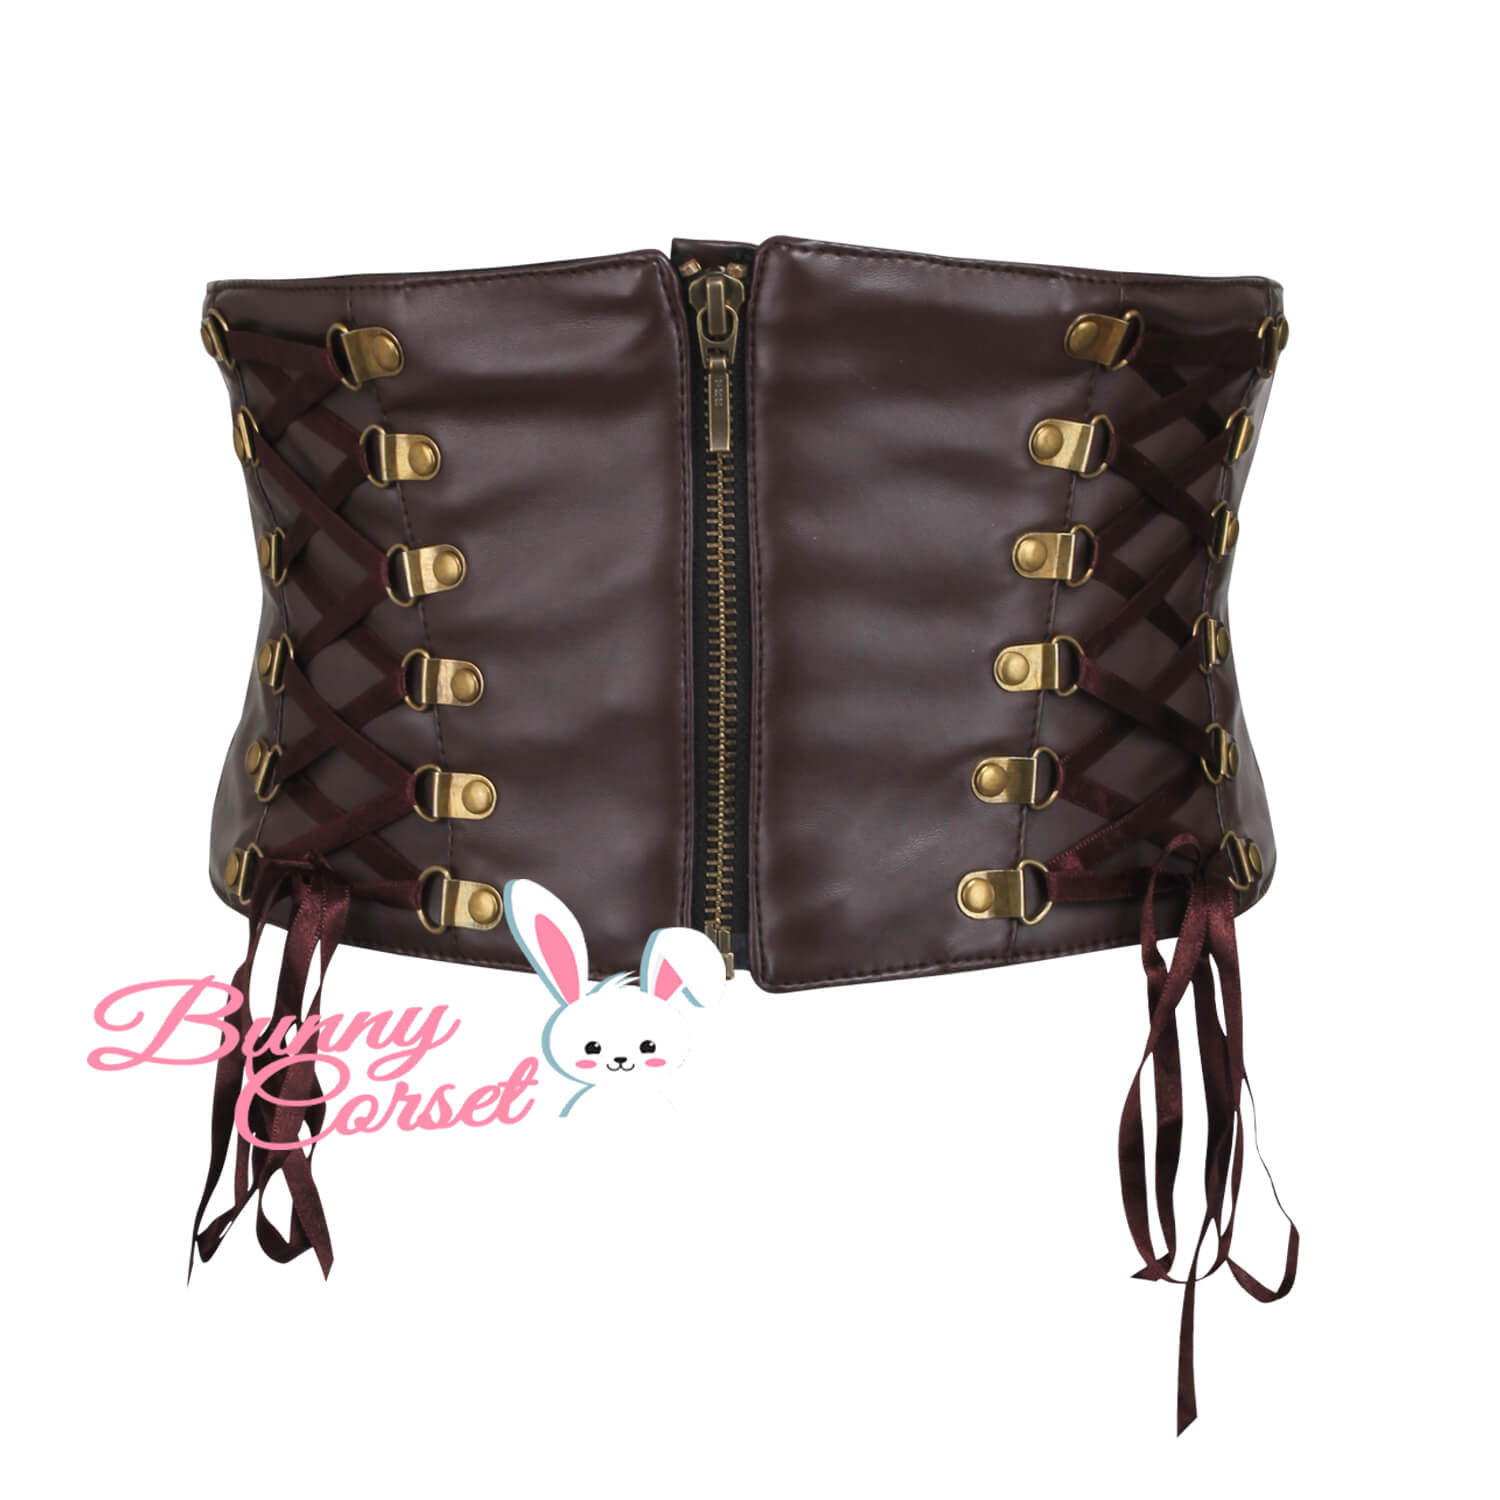 This Brown Corset Belt is just perfect – Bunny Corset